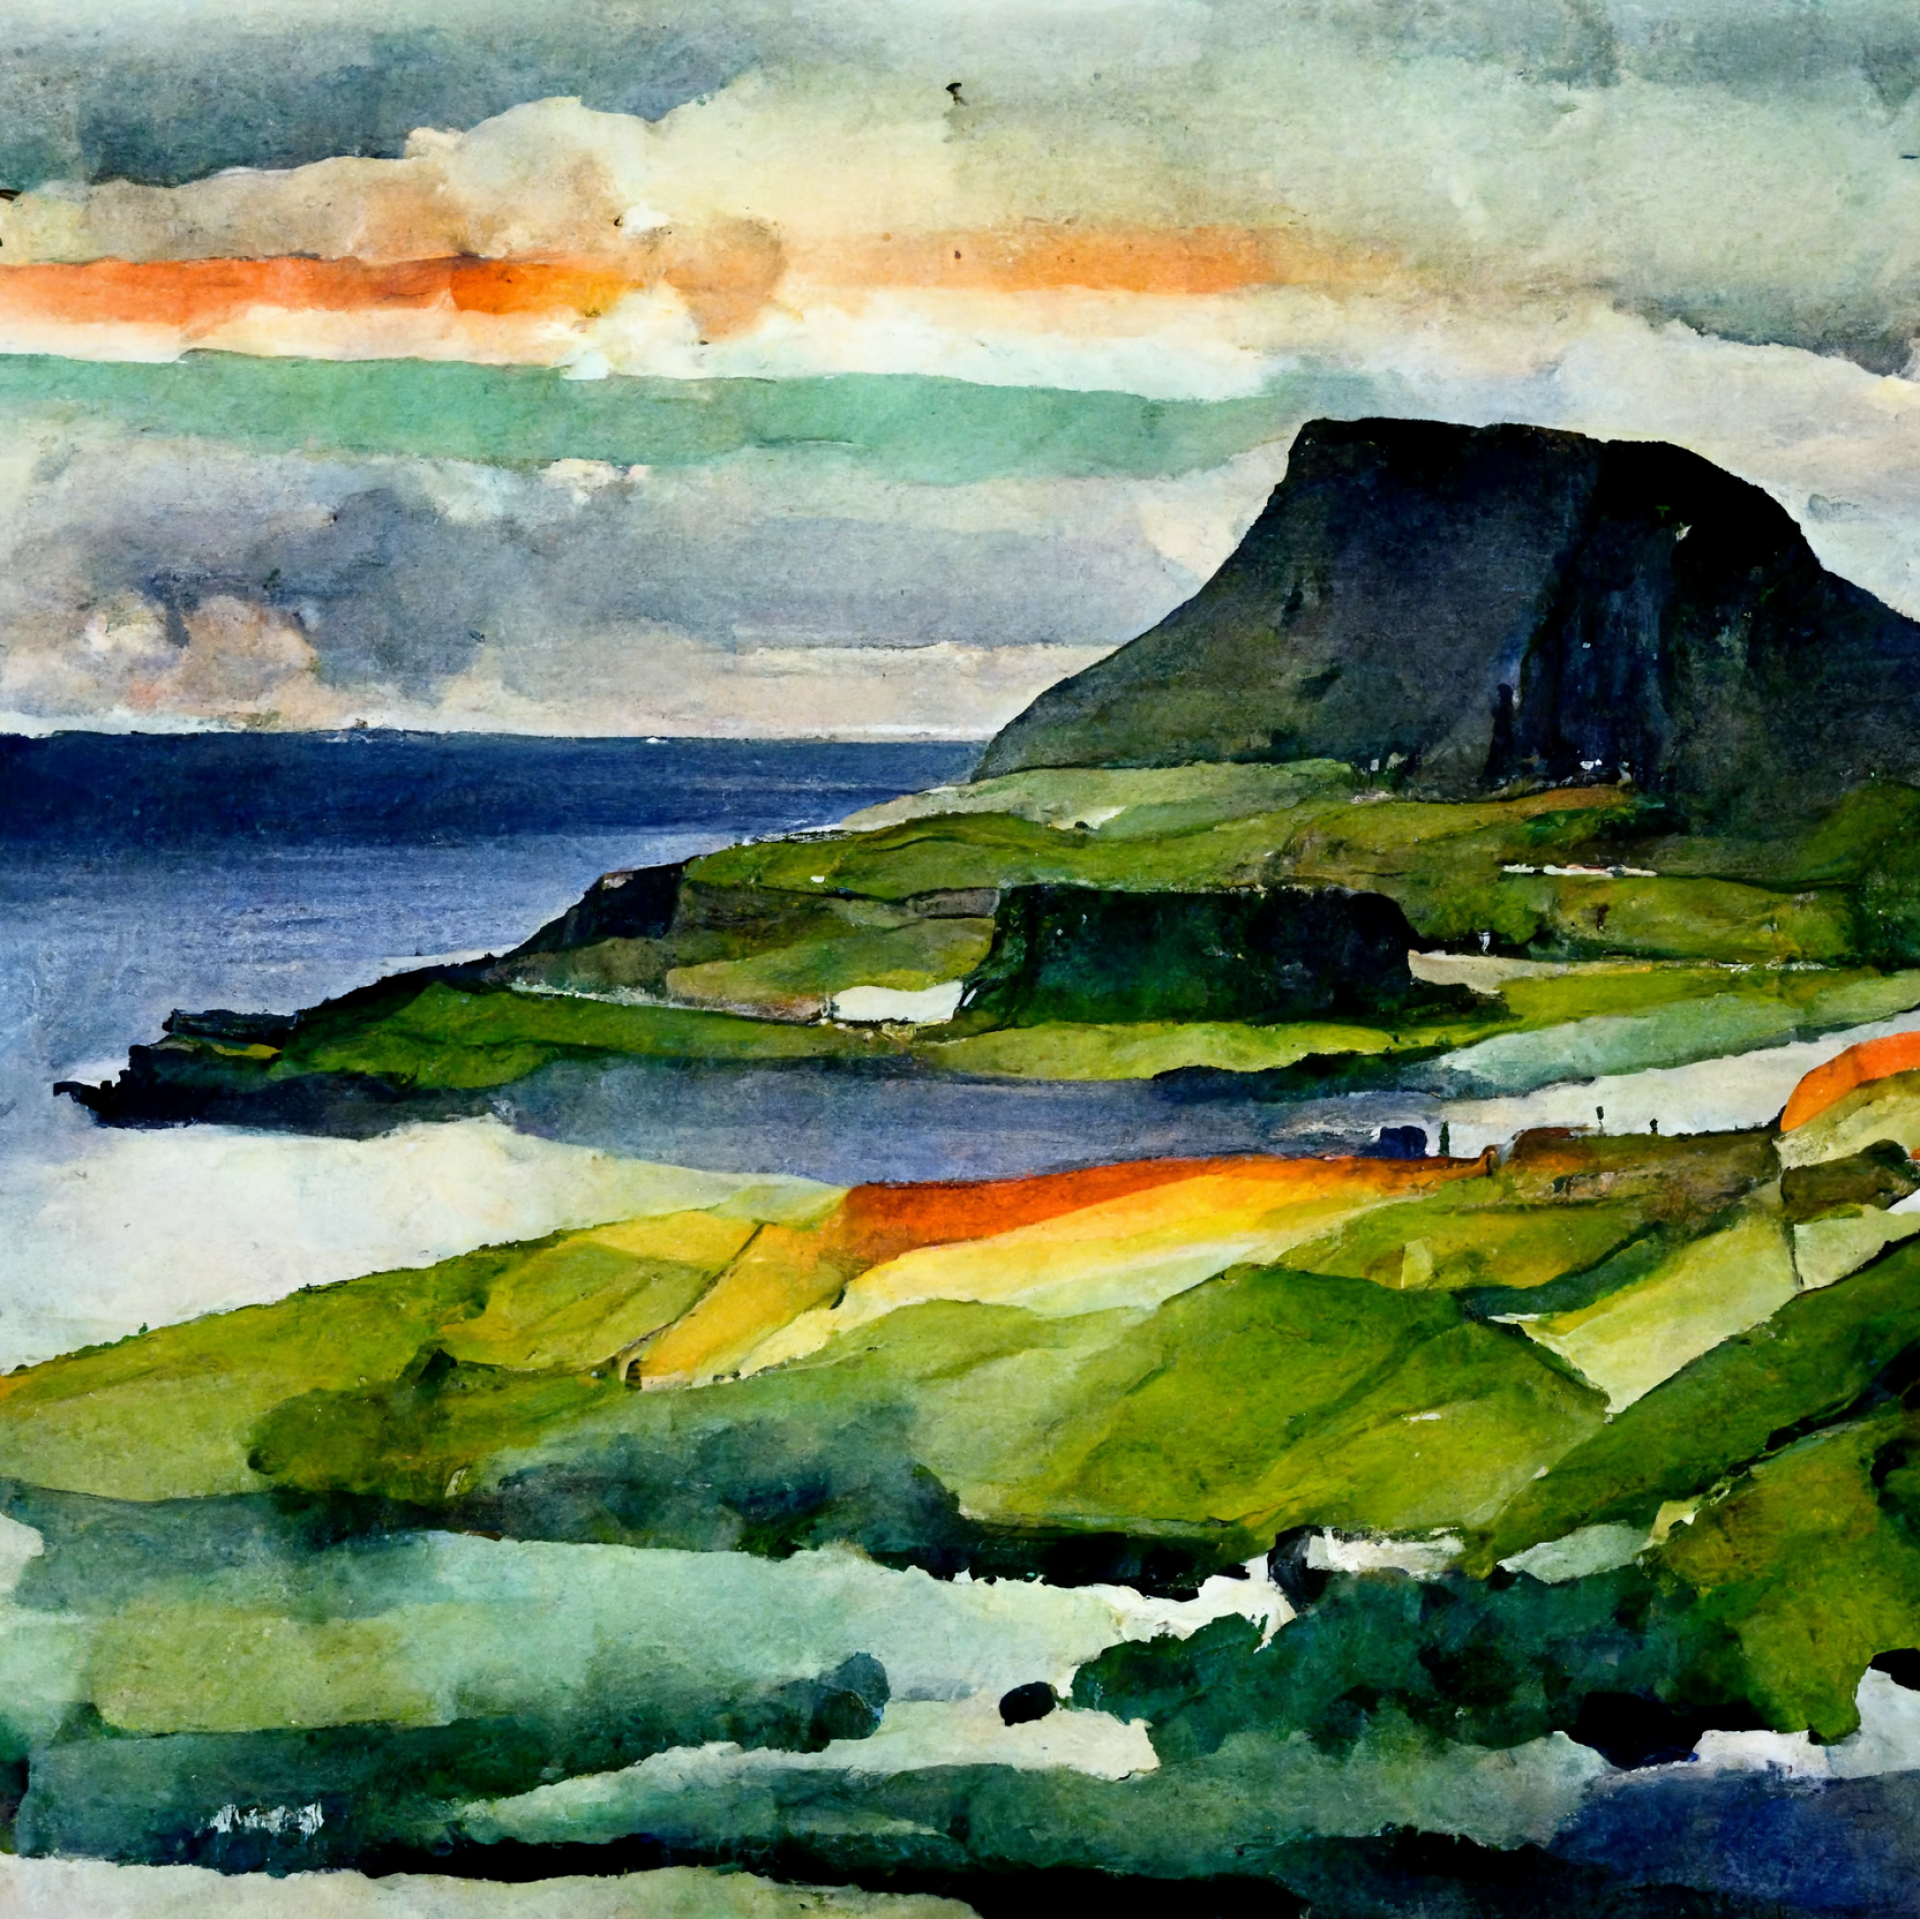 AI-generated image from Midjourney, the Faroe Islands inspired by Emily Carr.